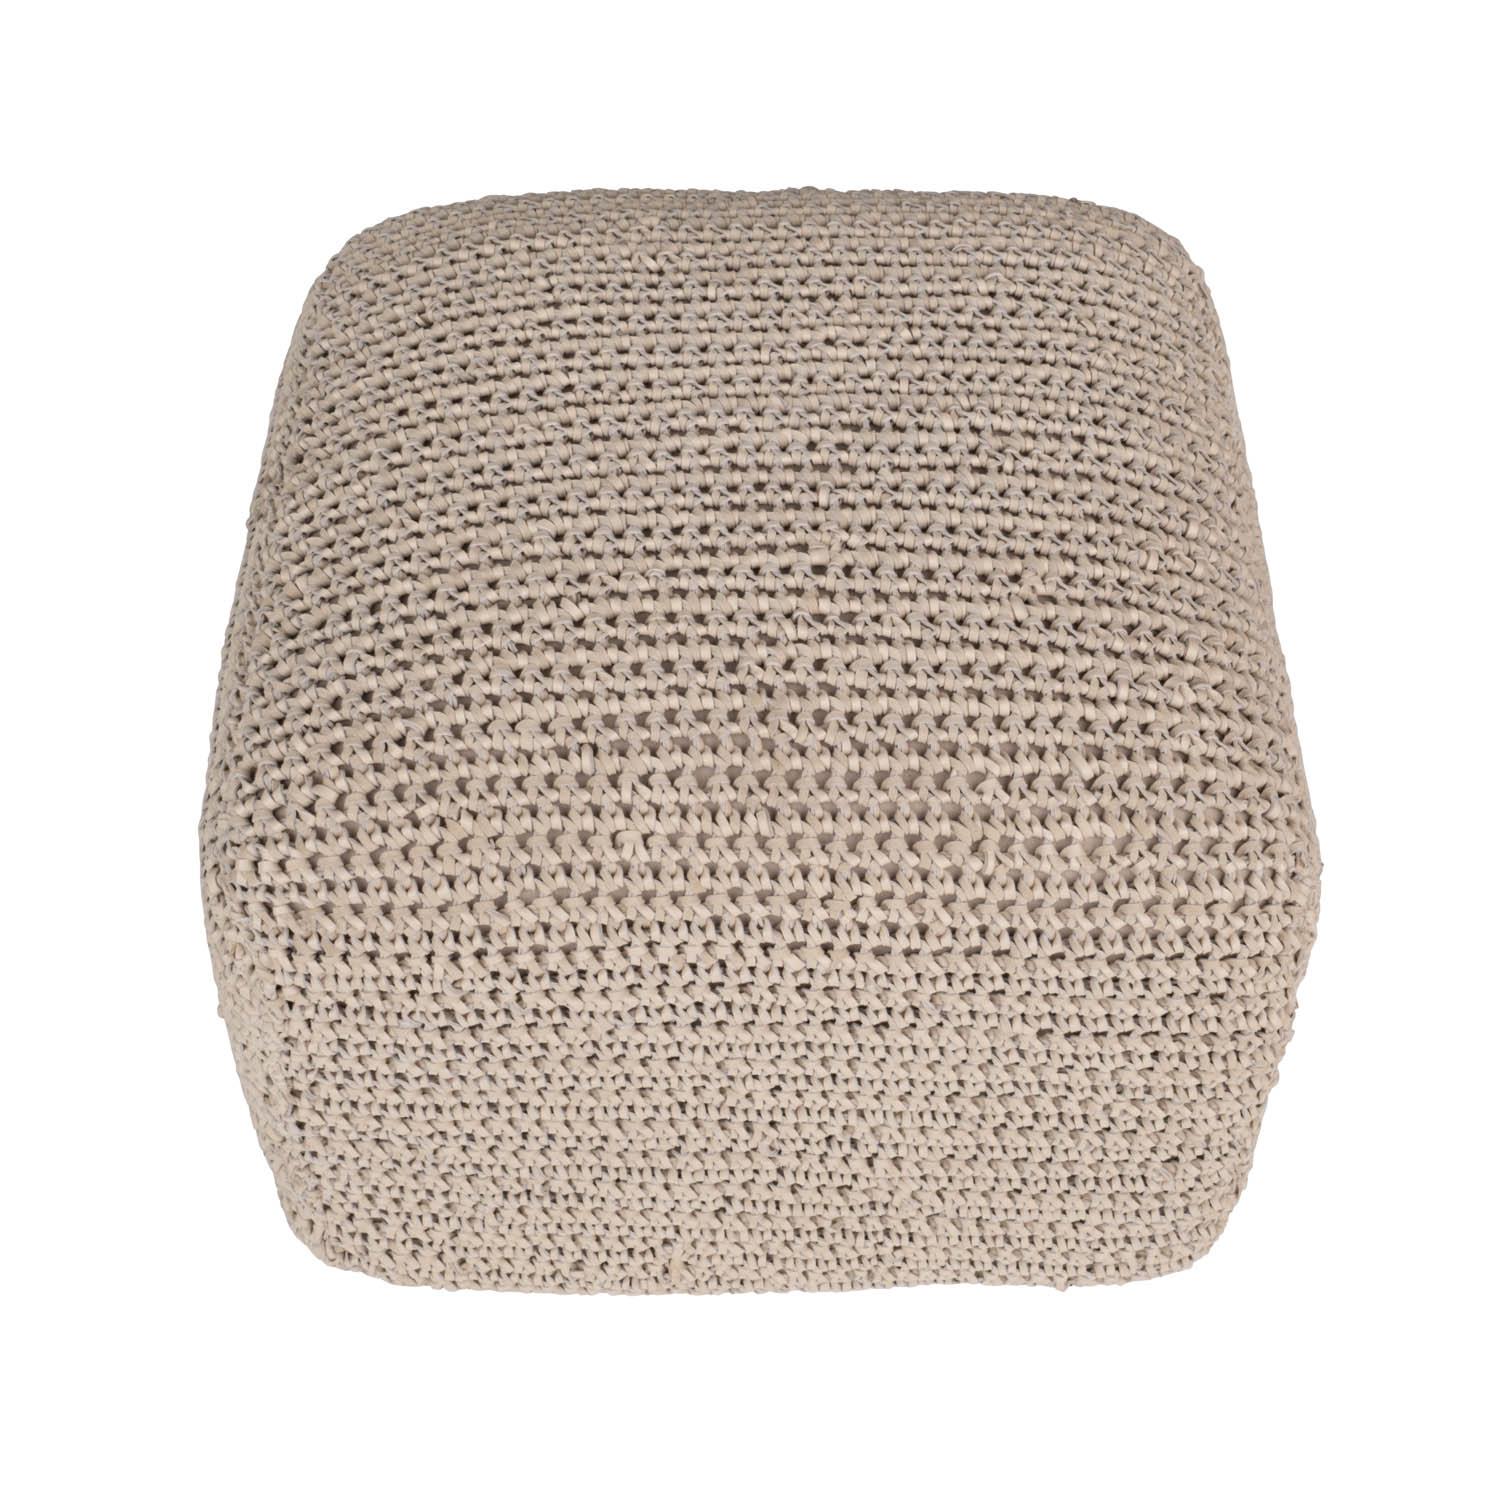 Crocheted Leather Cube Ottoman